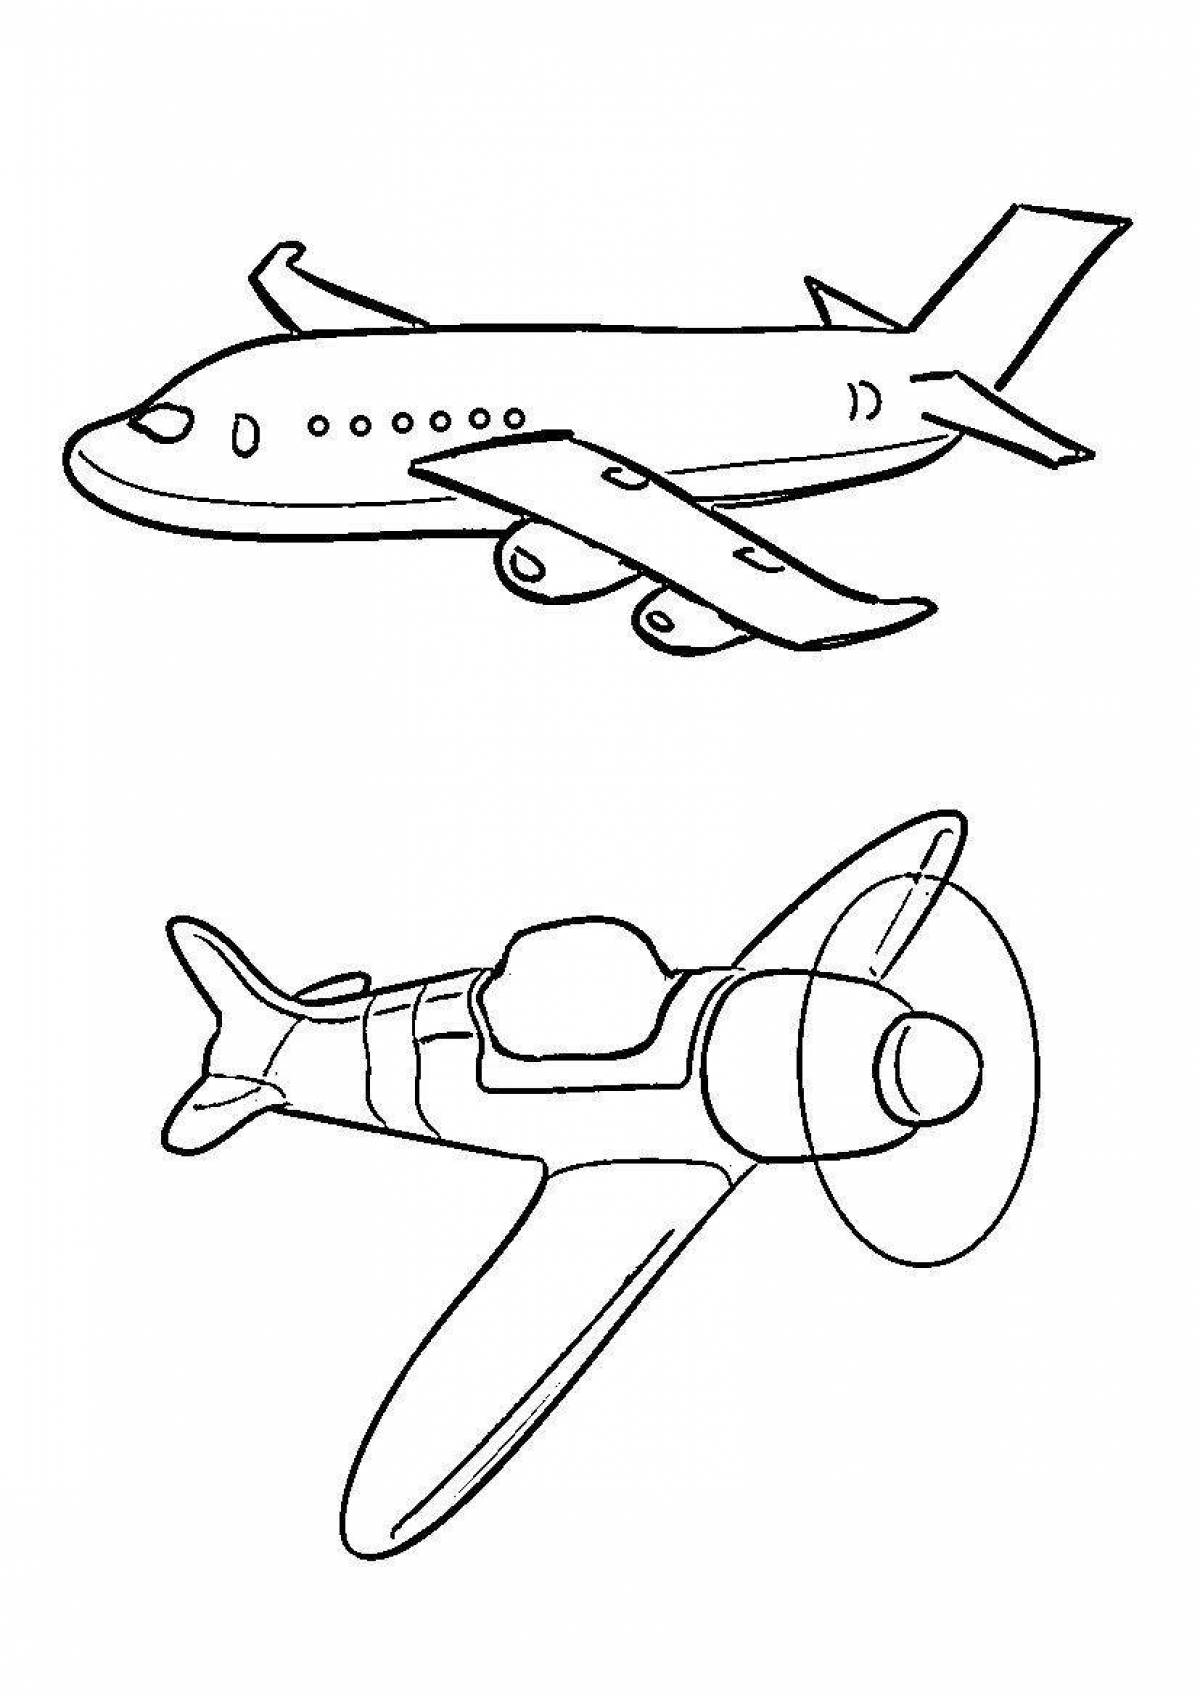 Adorable airplane coloring page for kids